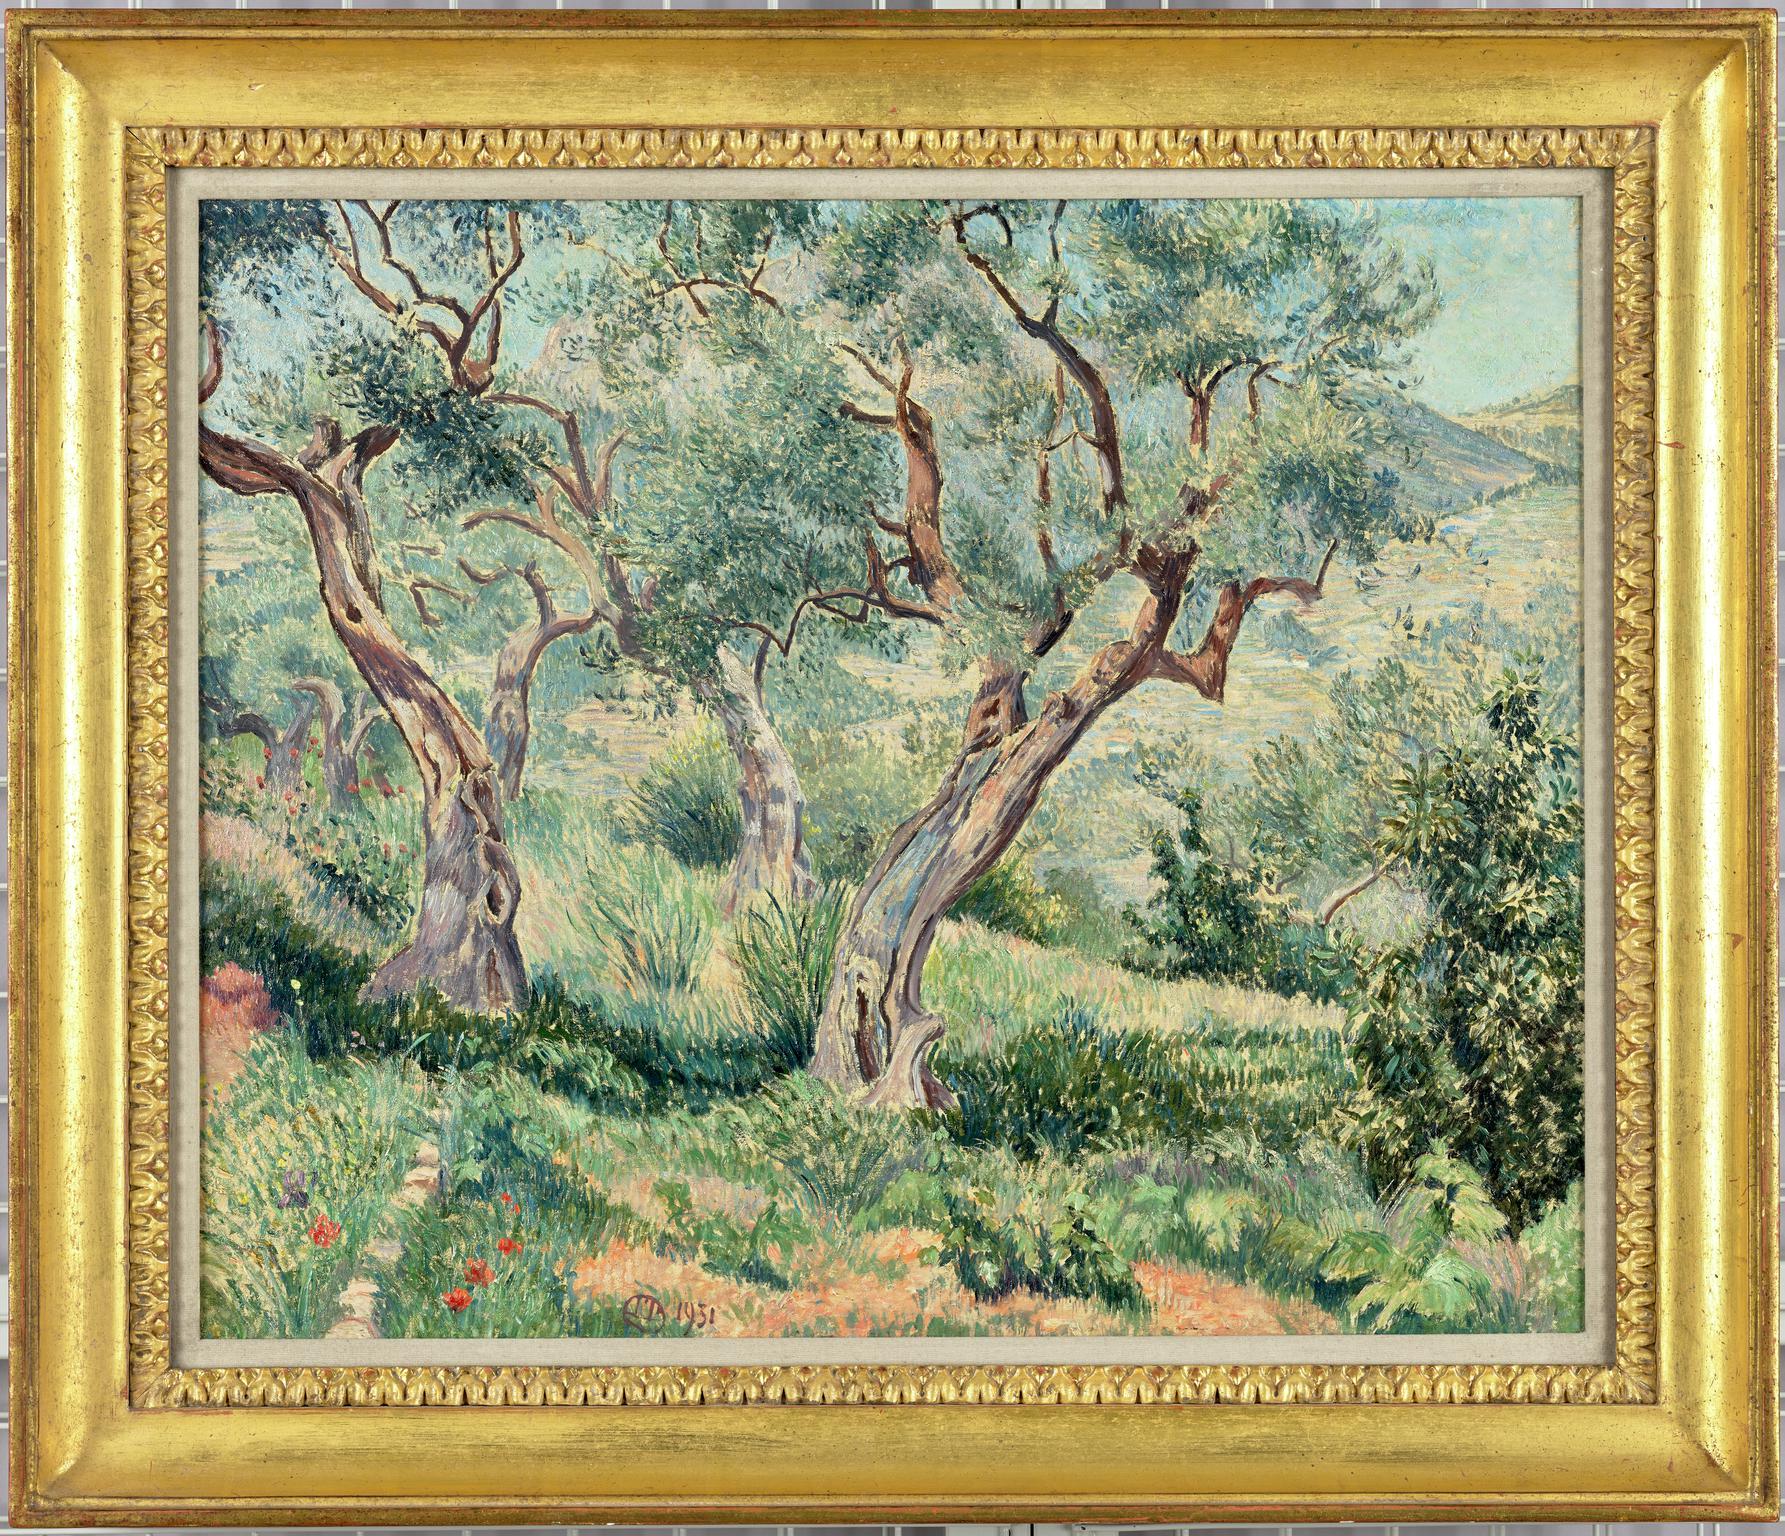 Les Oliviers du Cabanon, Toulon/ The Olive Trees by the Hut, Toulon